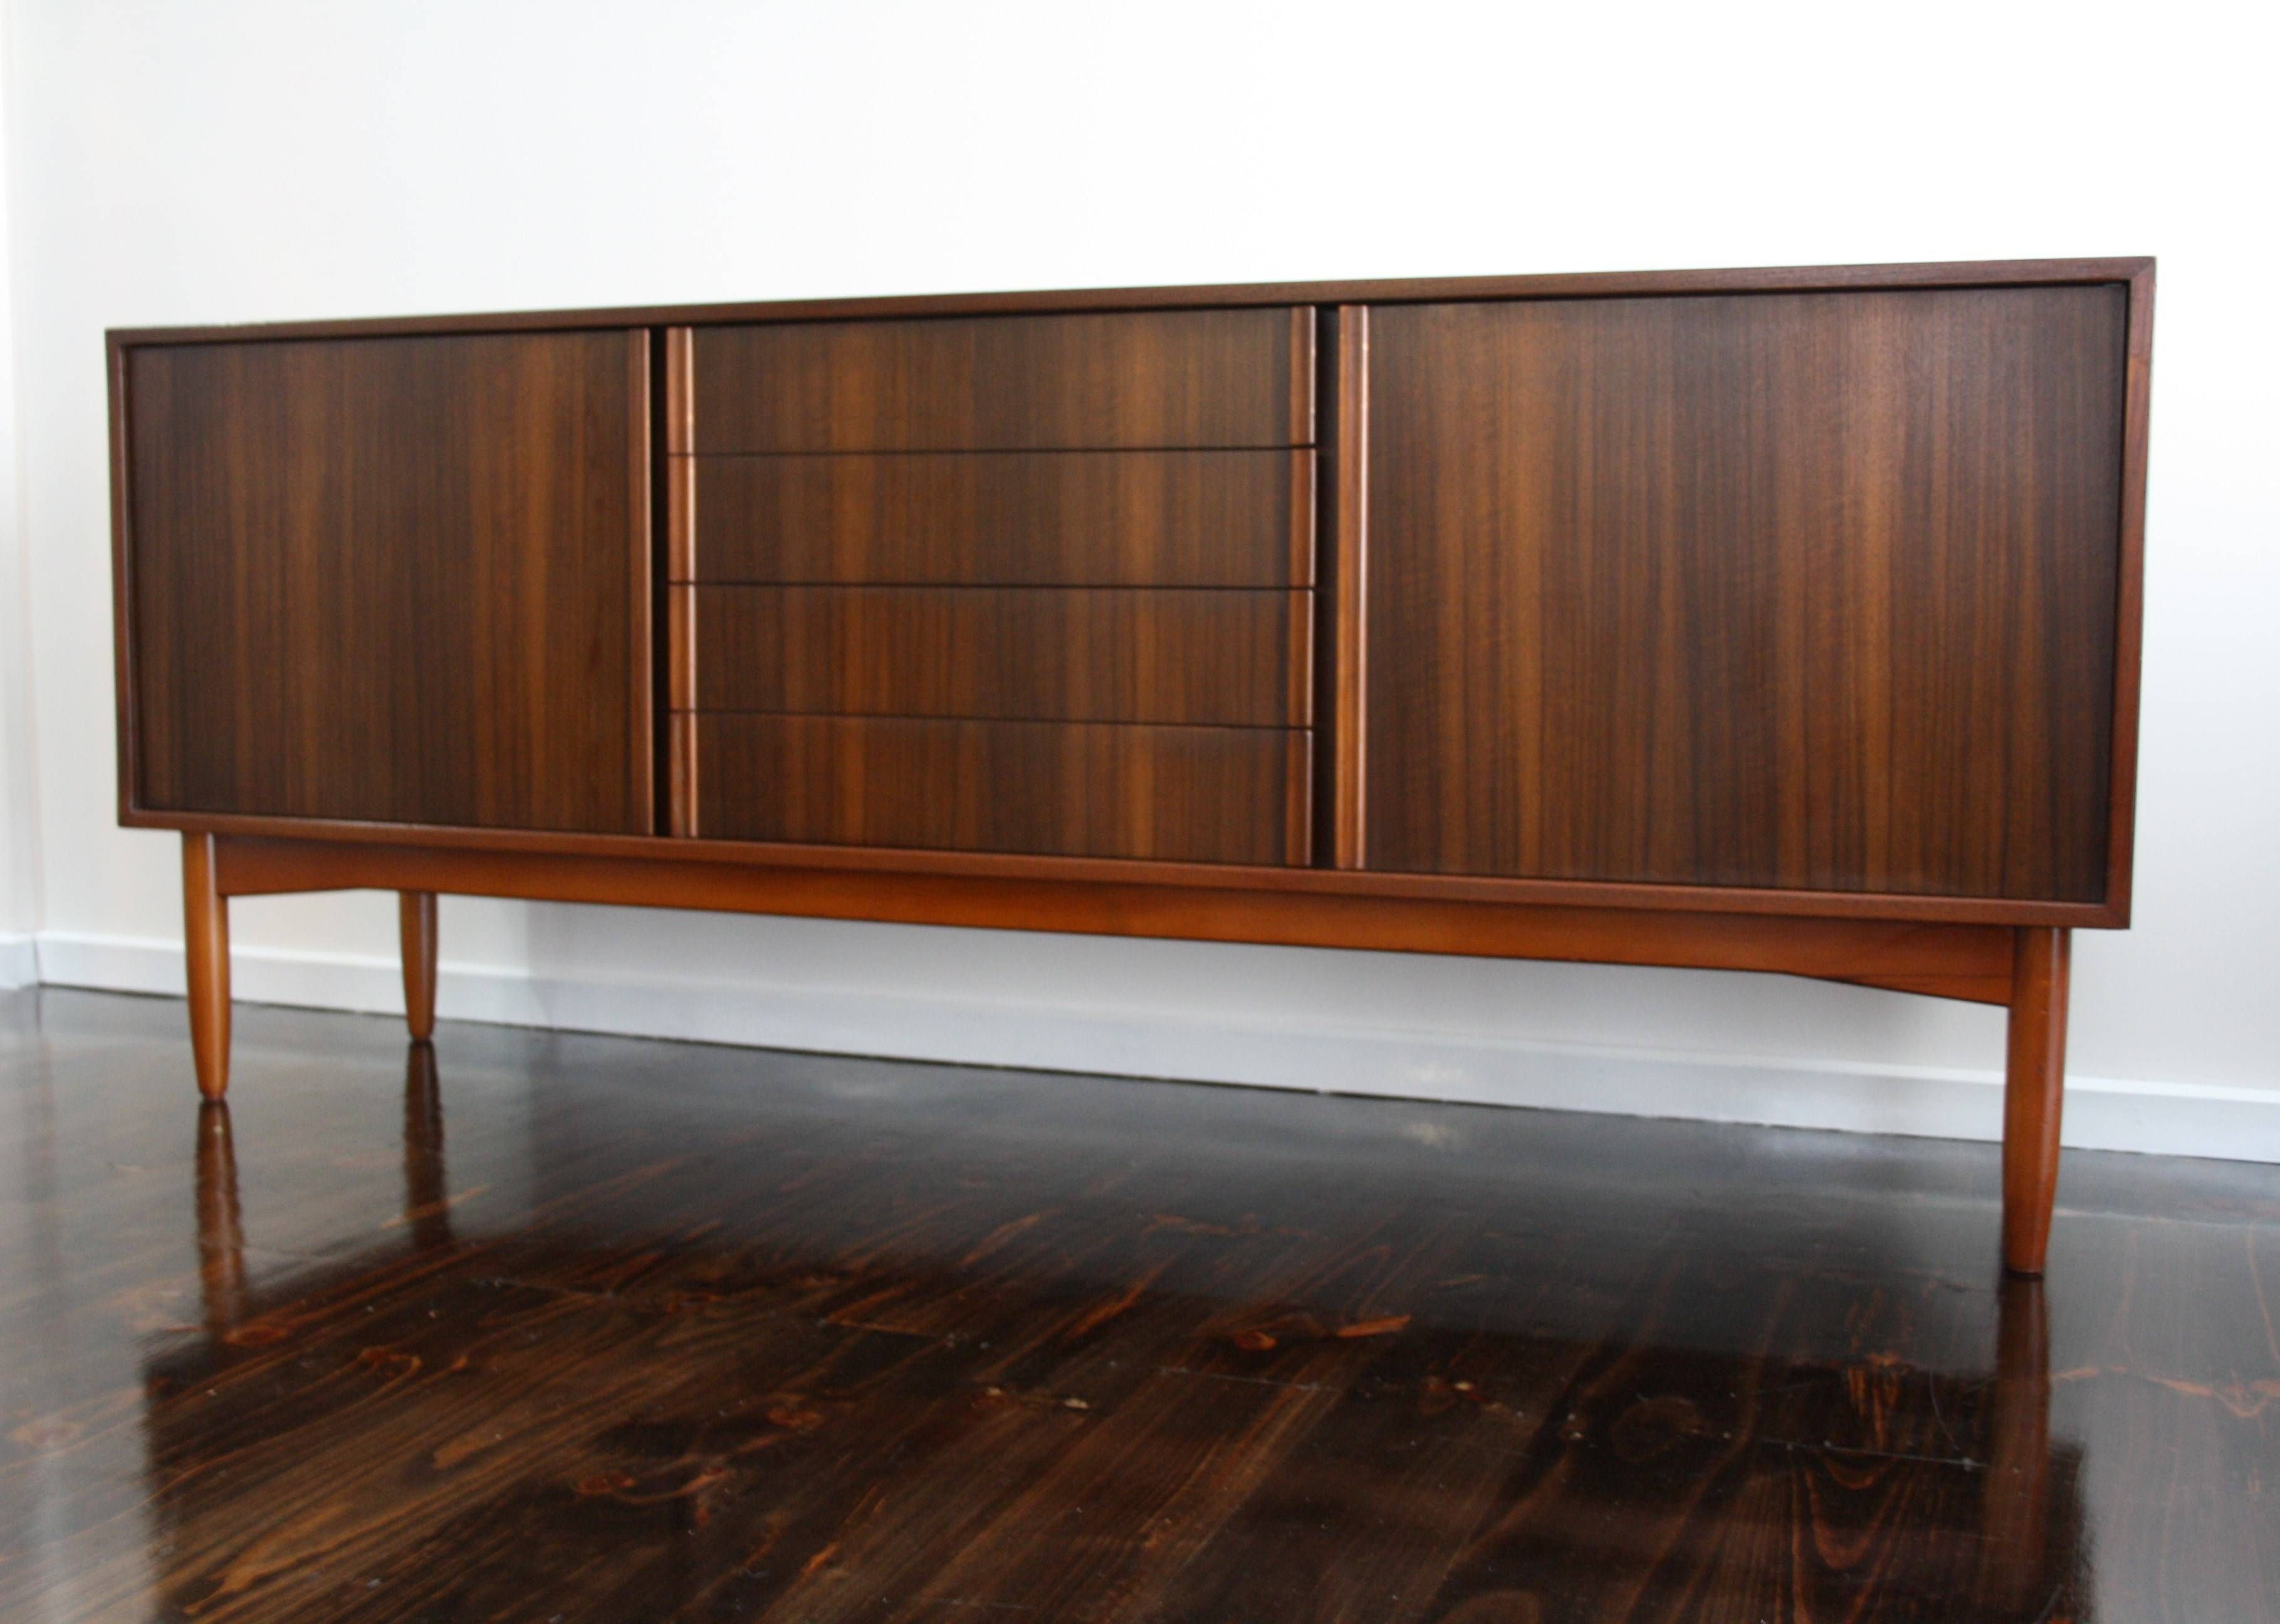 Modern Sideboards And Buffets Elegant And 20 Collection Of Modern Throughout Elegant Sideboards (View 3 of 15)